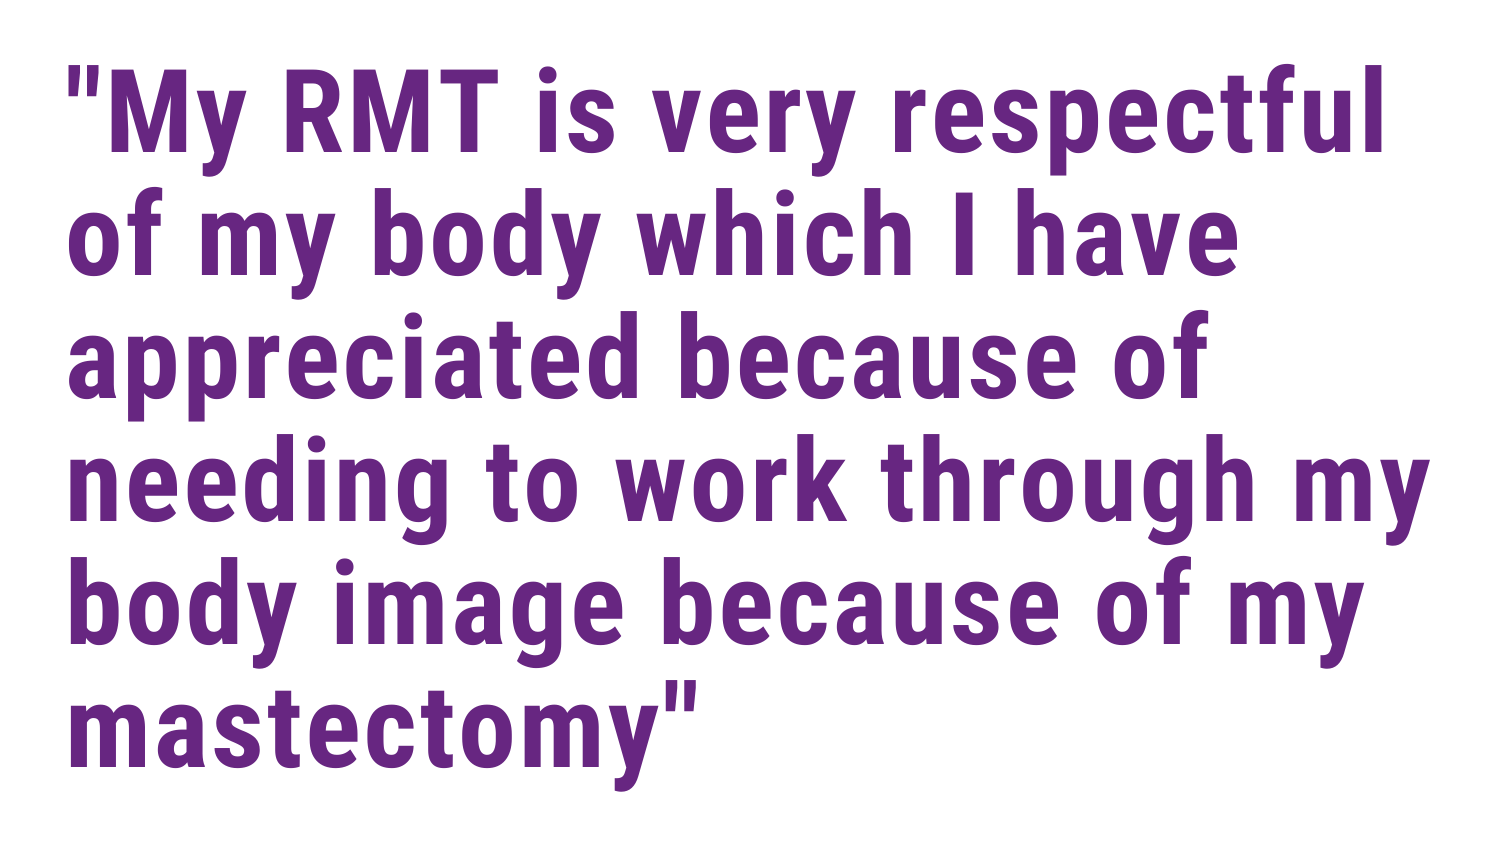 My RMT is very respectful of my body which I have appreciated because of needing to work through my body image because of my mastectomy.